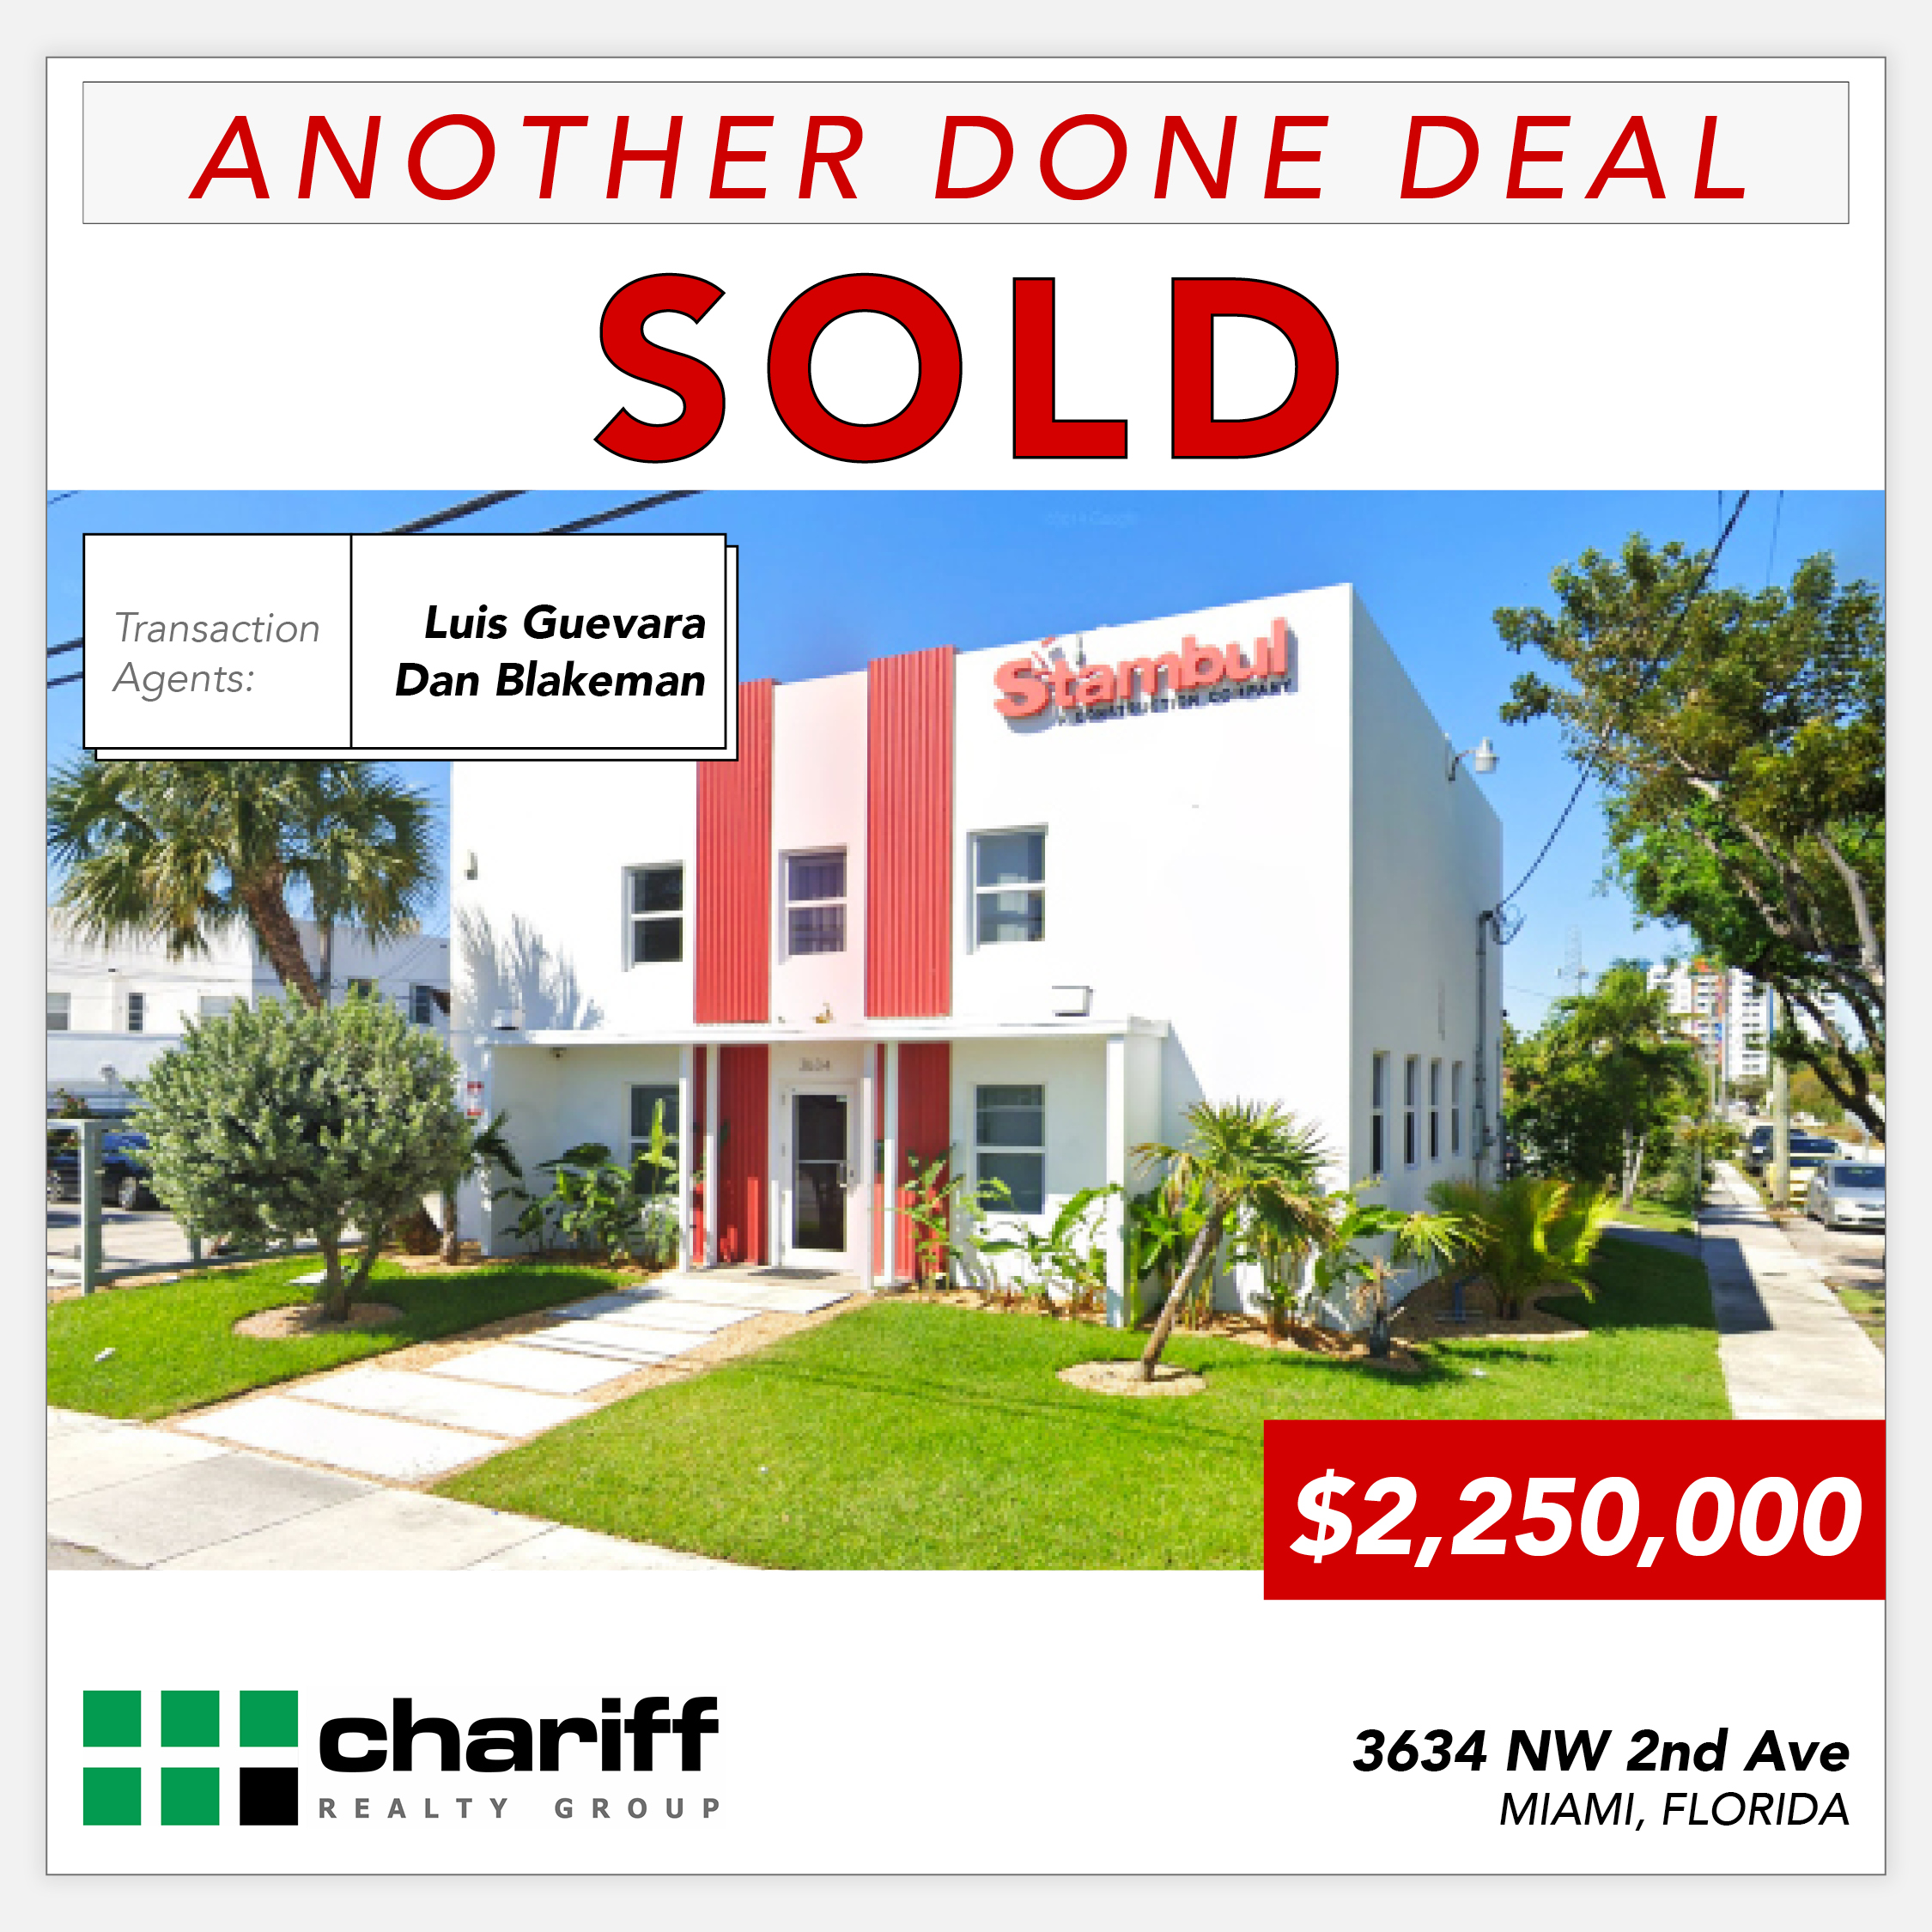 3634 NW 2nd Ave - Midtown Miami, Florida, Another Done Deal Sold - Chariff Realty Group